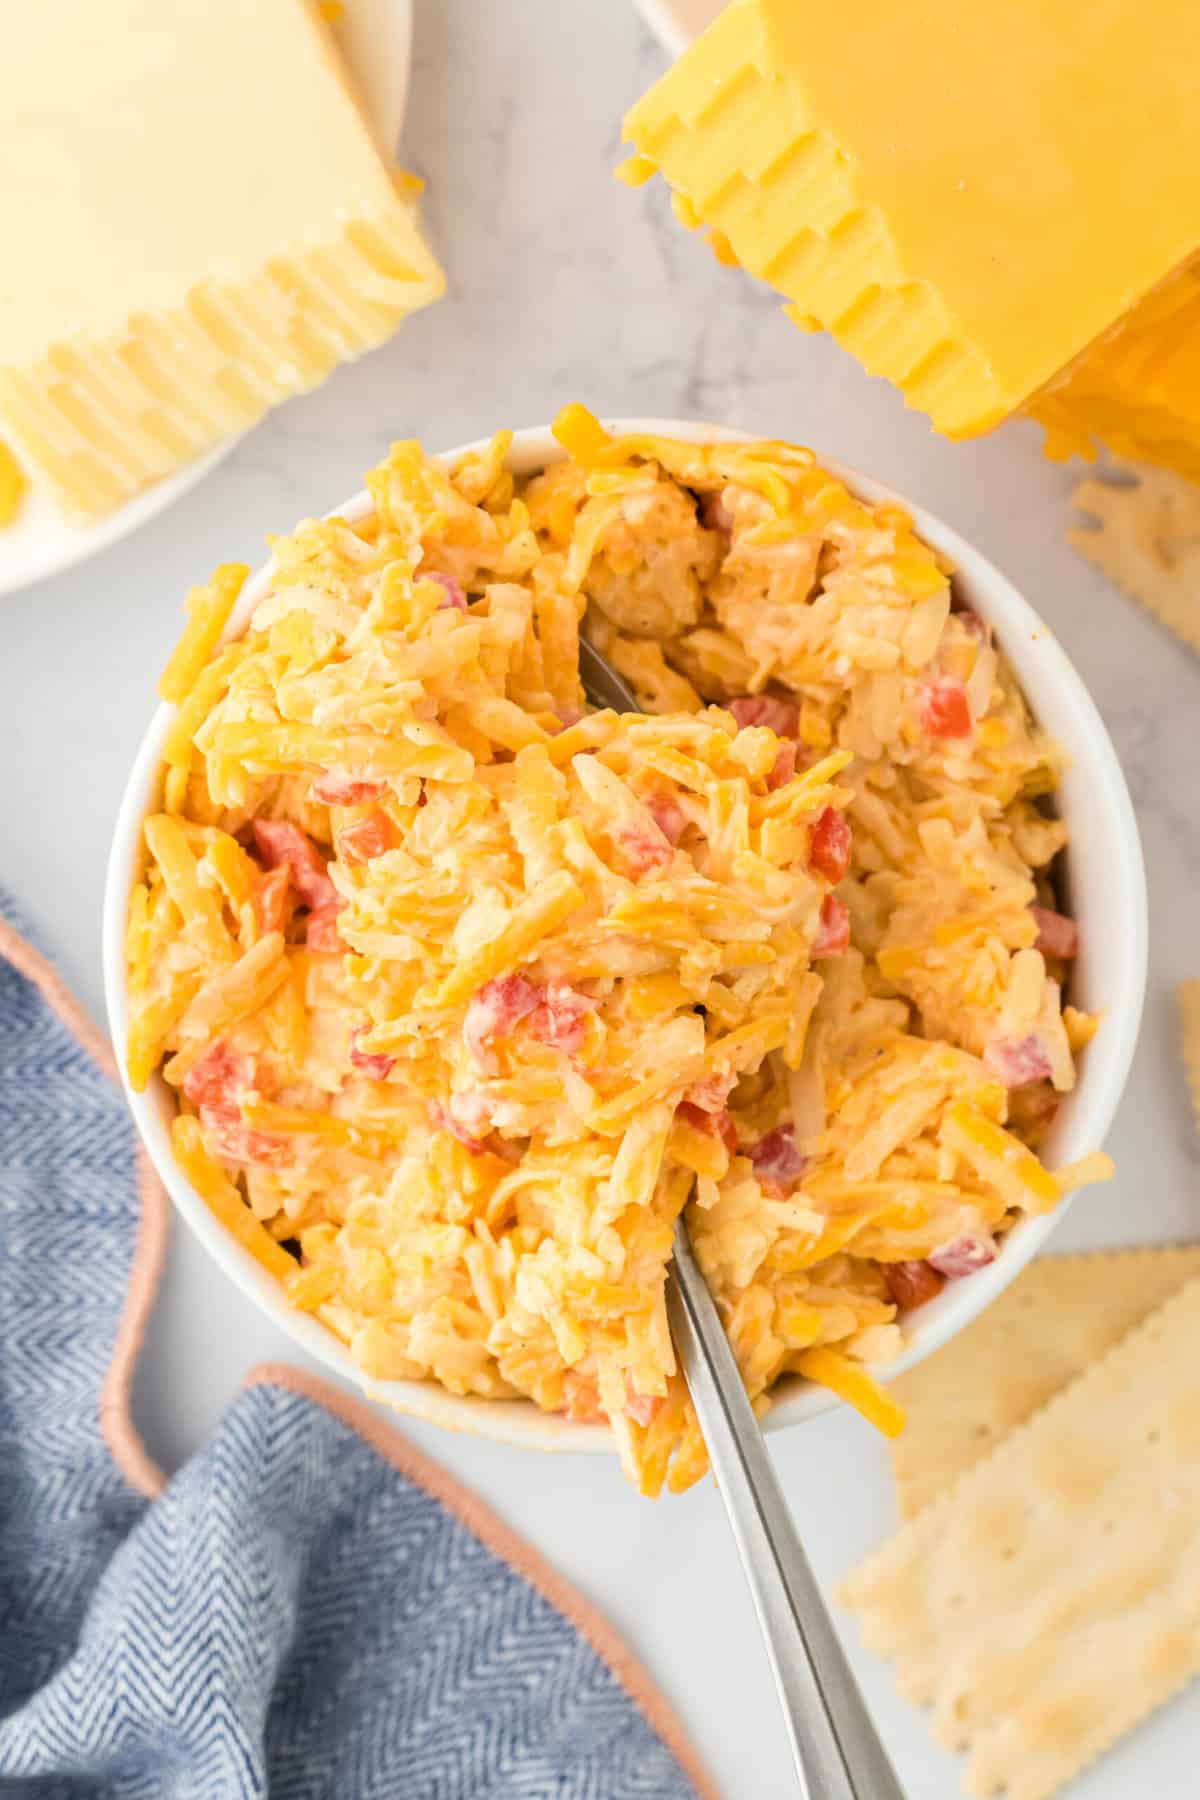 A homemade pimento cheese spread in a white bowl with a spoon inside